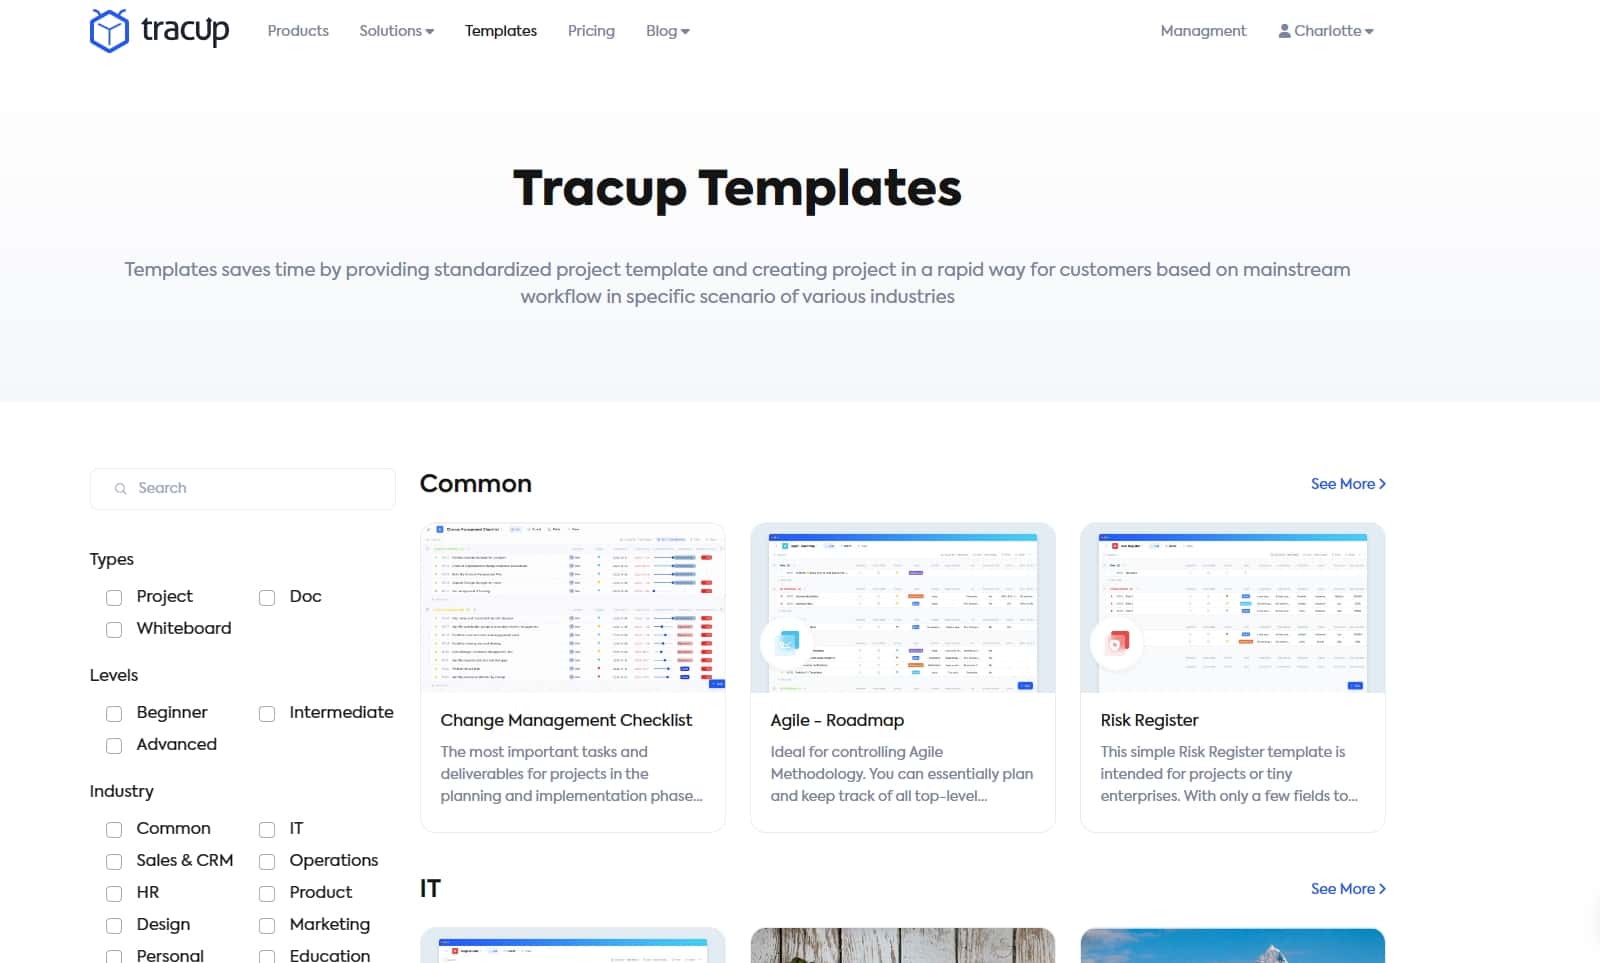 tracup_main_page